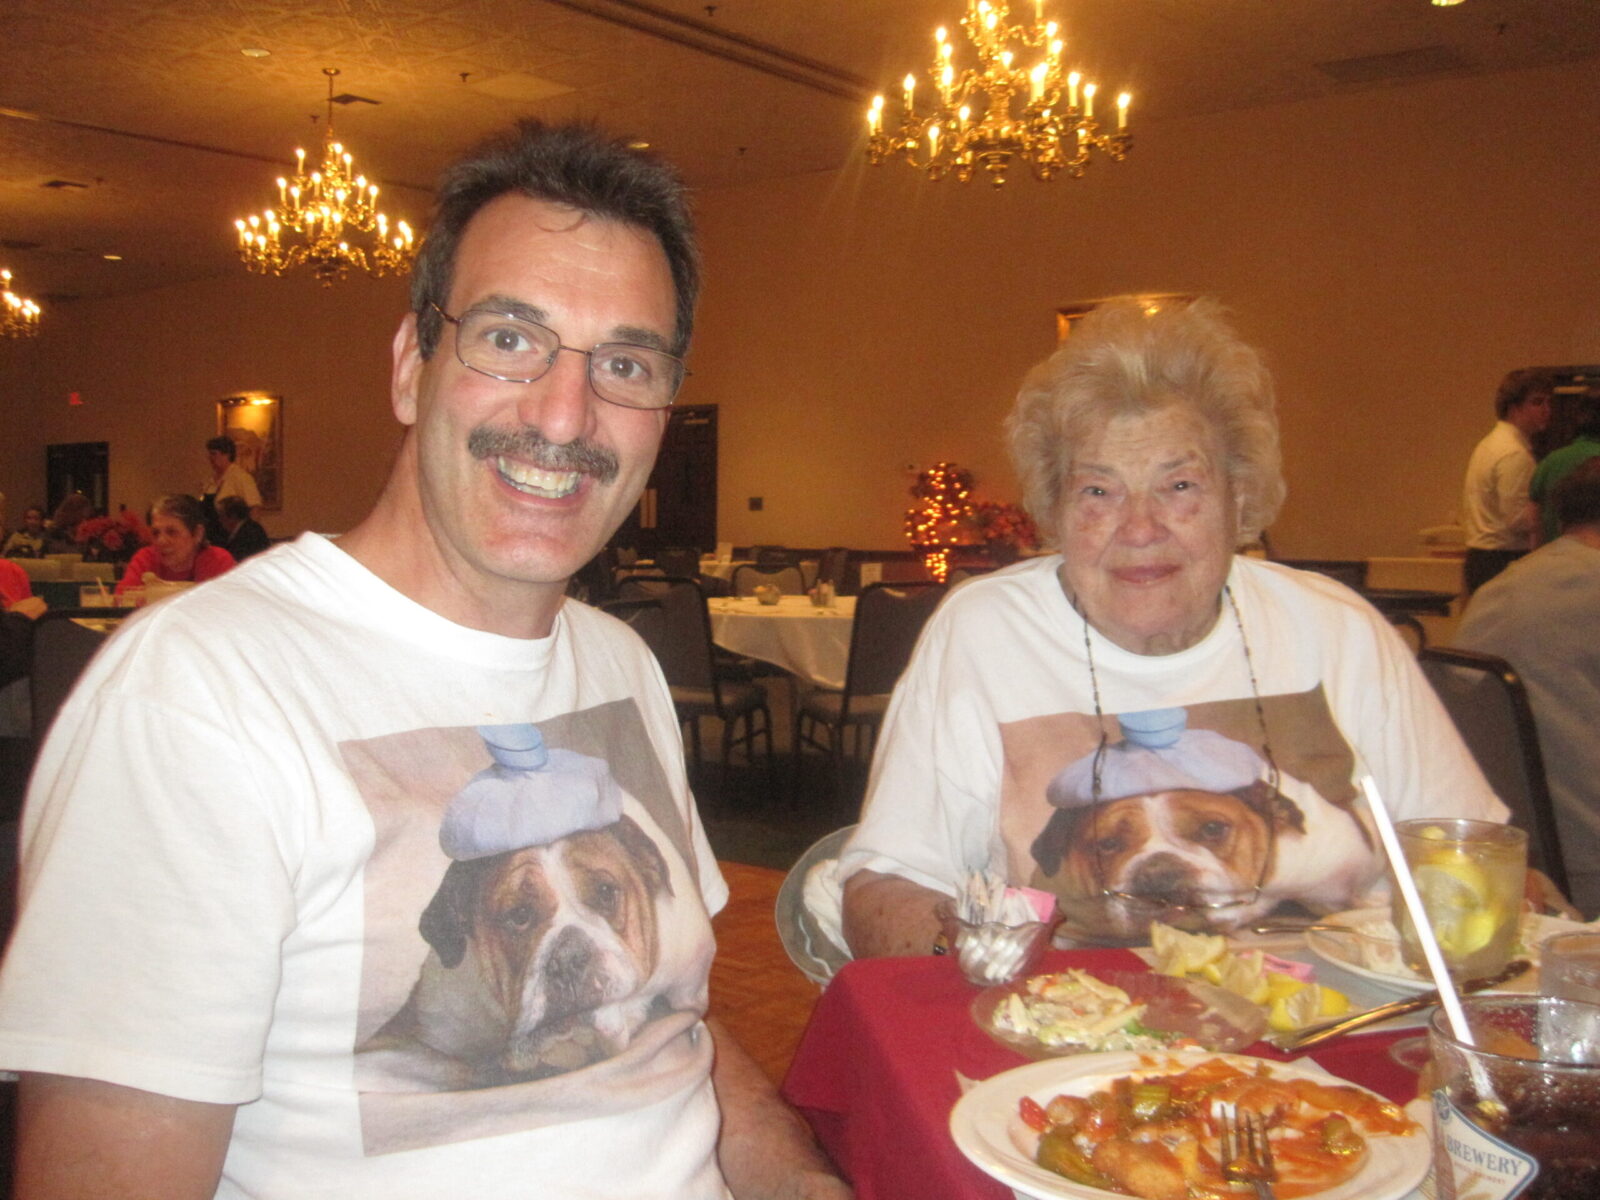 Mom and I out to eat with our dog shirts on. NeedEncouragement.com